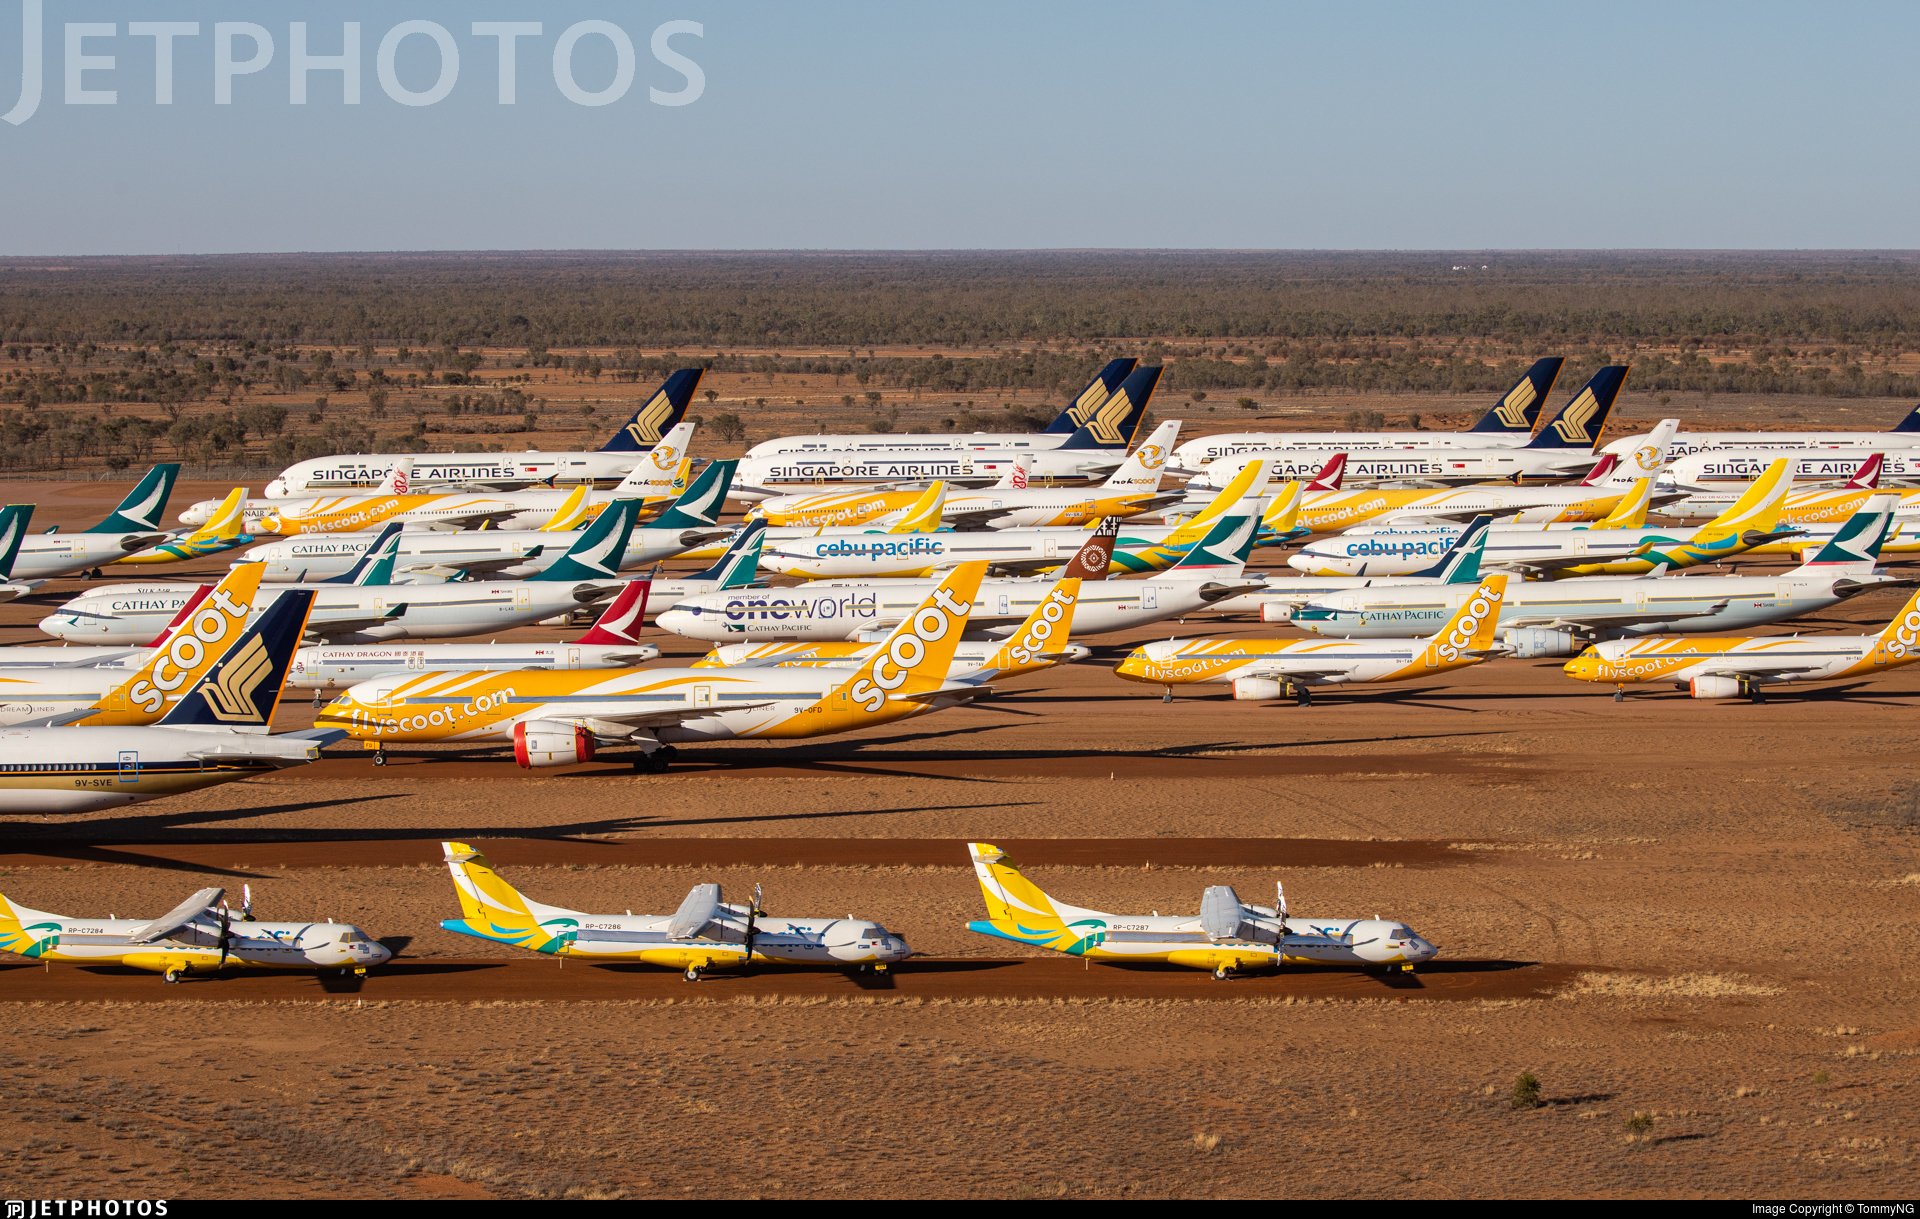 Jetphotos On Twitter Various Airlines Are Storing Aircraft In Alice Springs Https T Co 3jxkhzxwa6 C Tommyng